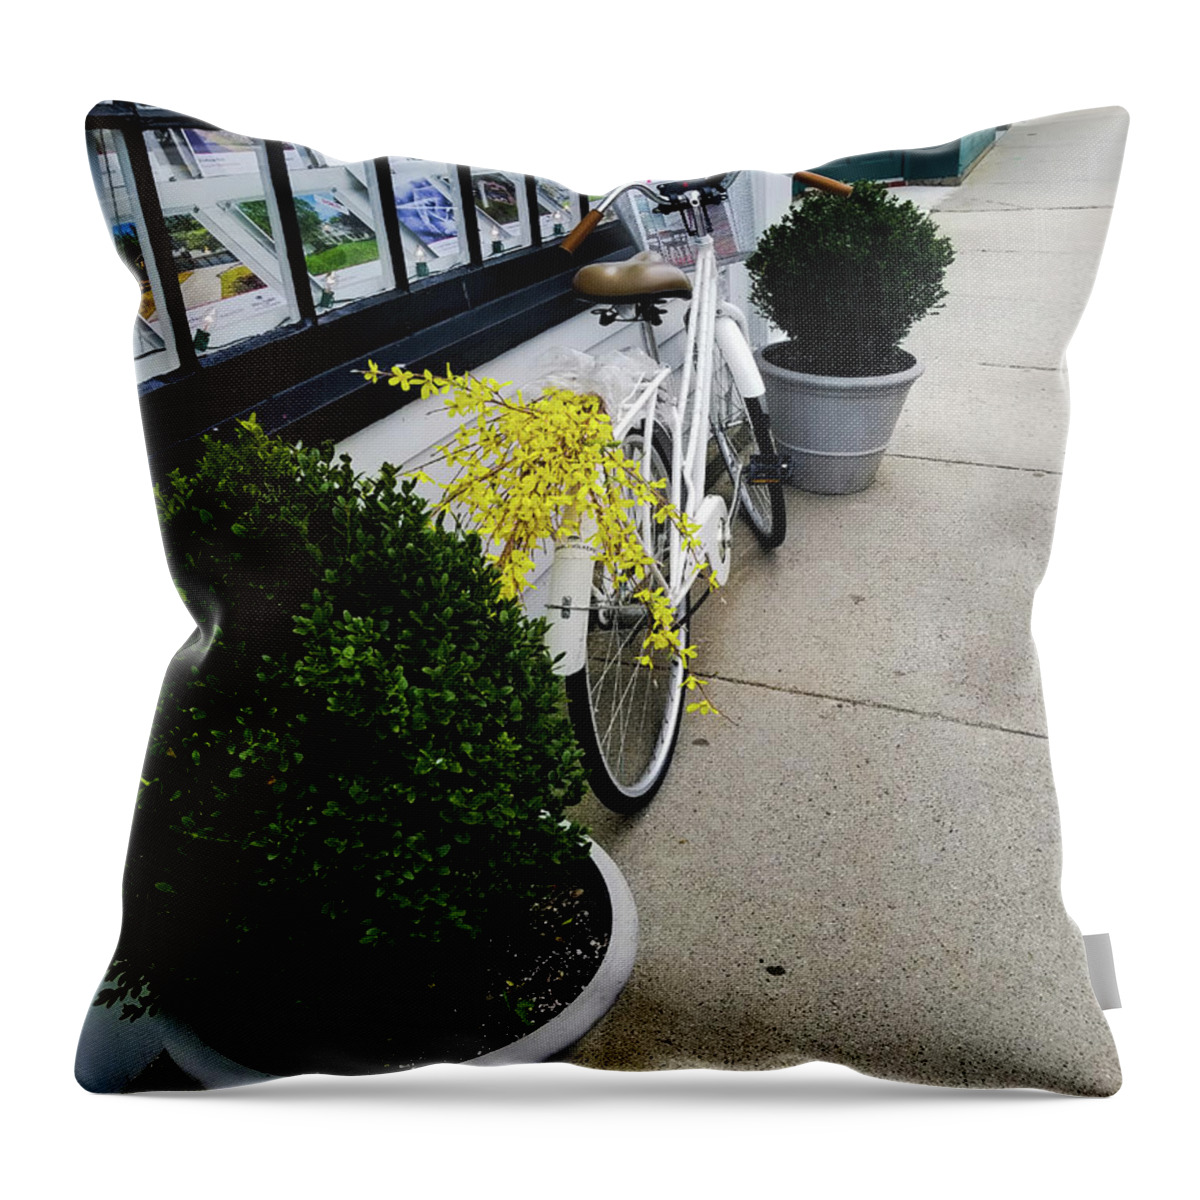 New England Throw Pillow featuring the photograph New England Shops by Elizabeth M